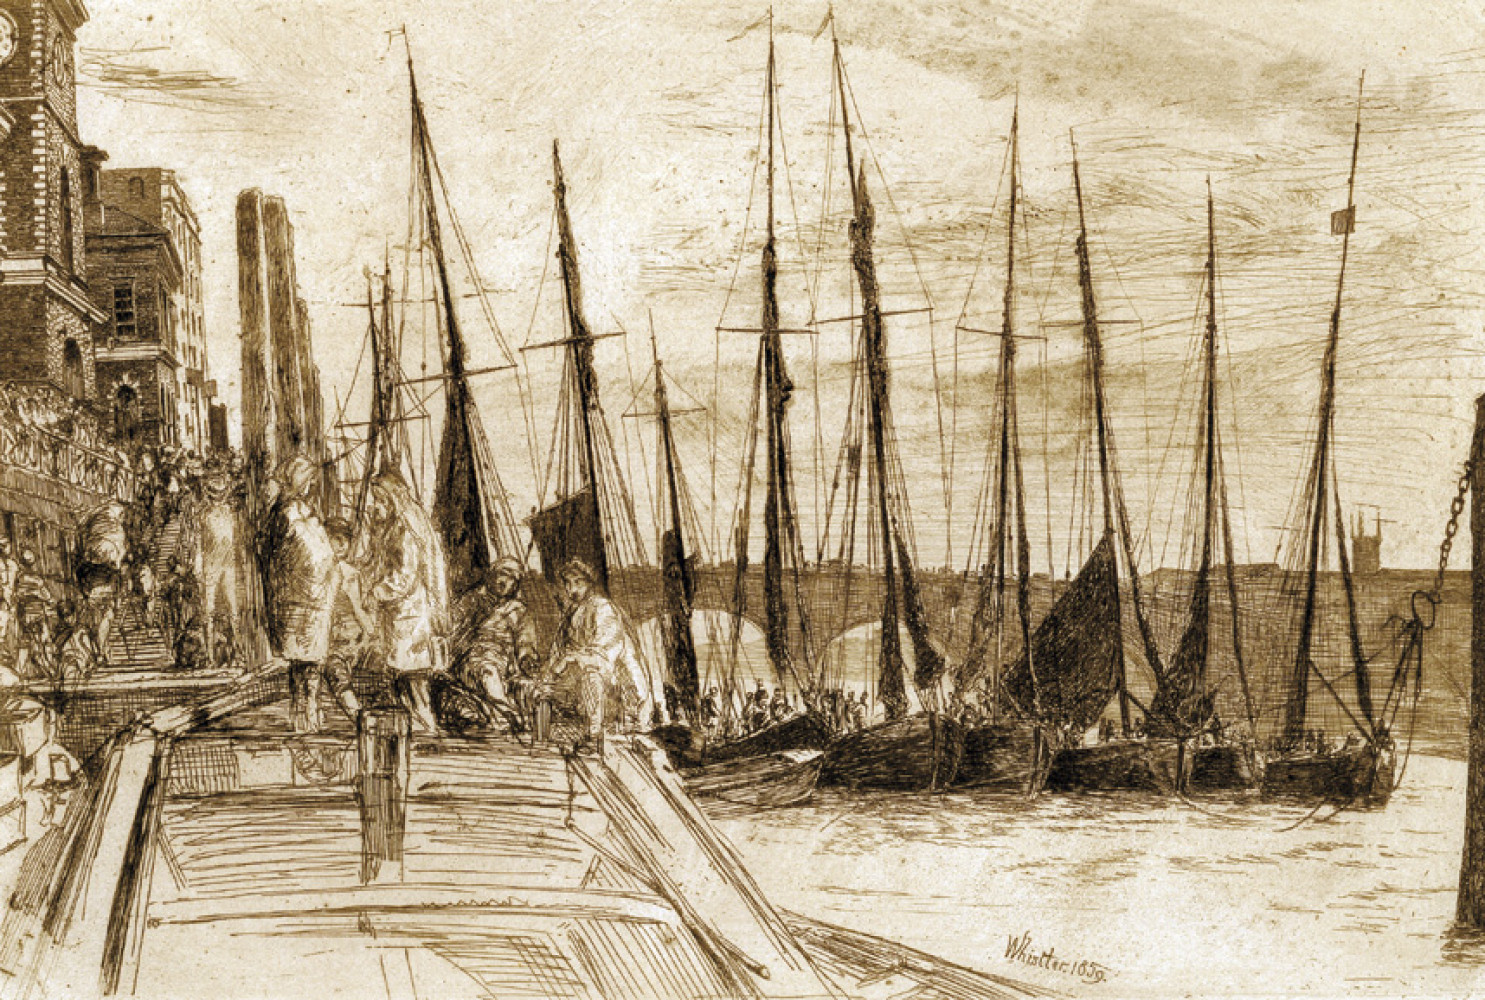 Billingsgate, 1859, By James A. M. Whistler (American, 1834—1903); Etching on paper; 8 1/8 x 10 7/8 inches; Gift of Dr. and Mrs. (Caroline) Anton Vreede; 2004.004.0007